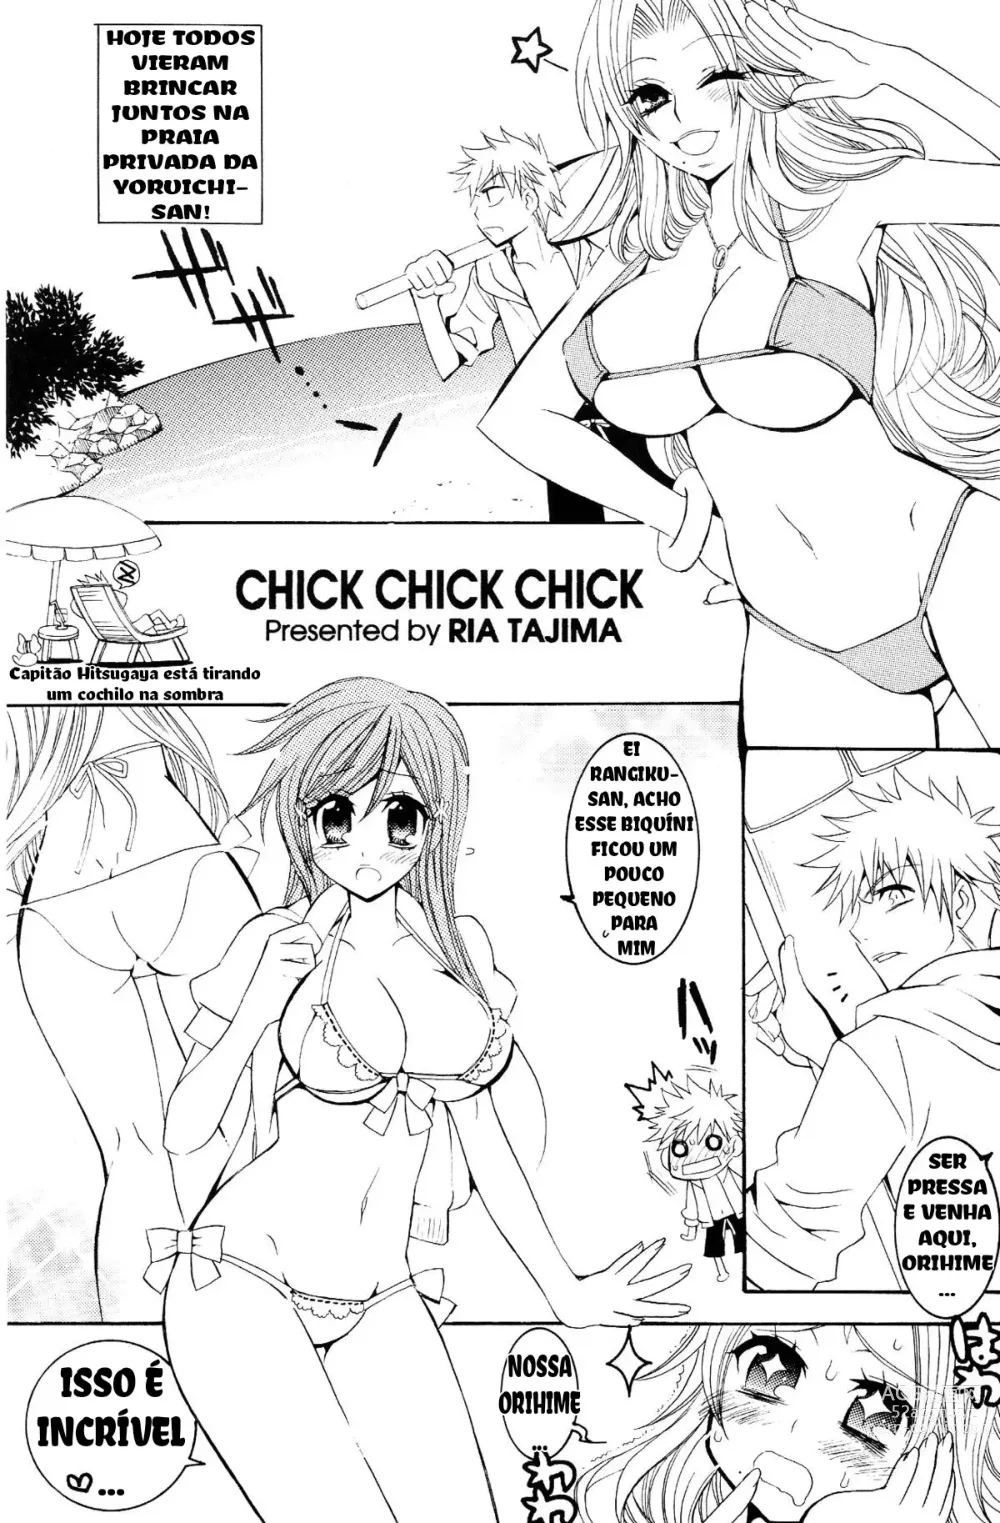 Page 4 of doujinshi CHICK CHICK CHICK